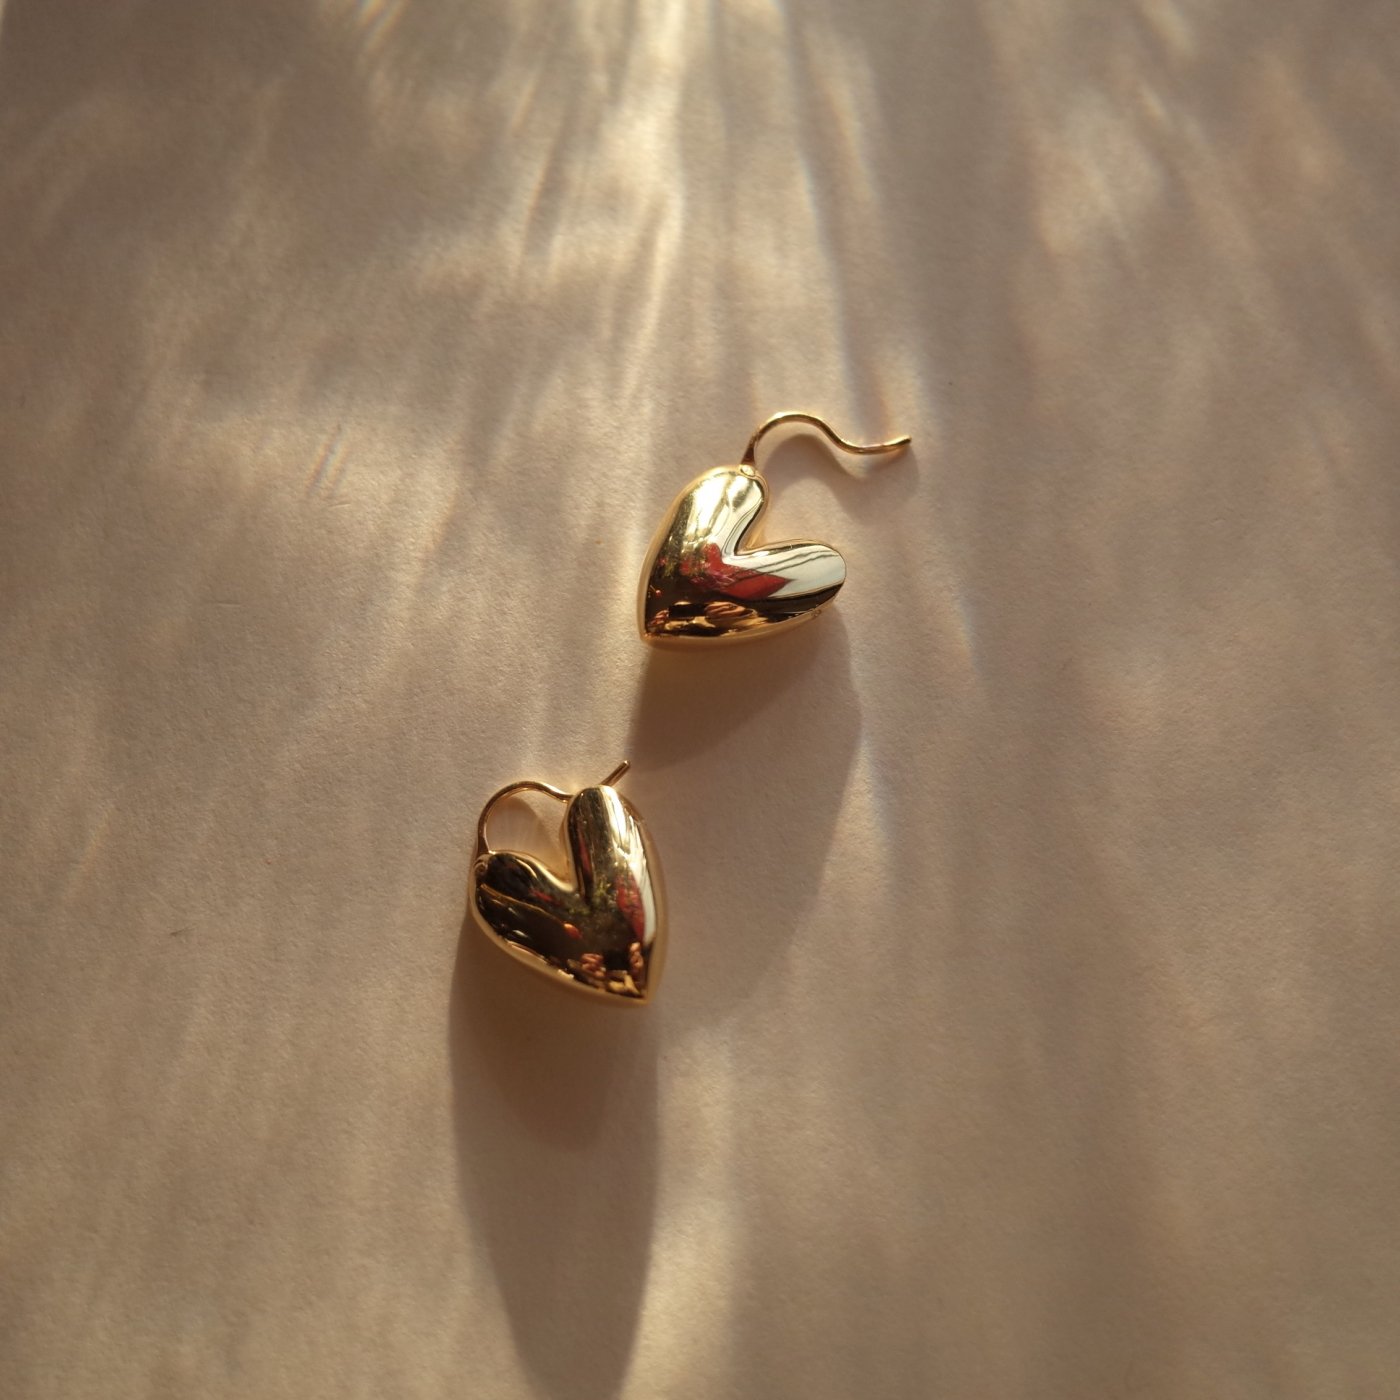 R.ALAGAN ララガン-TINY PUFFY HEART HOOPS-GOLD - LOCALERS